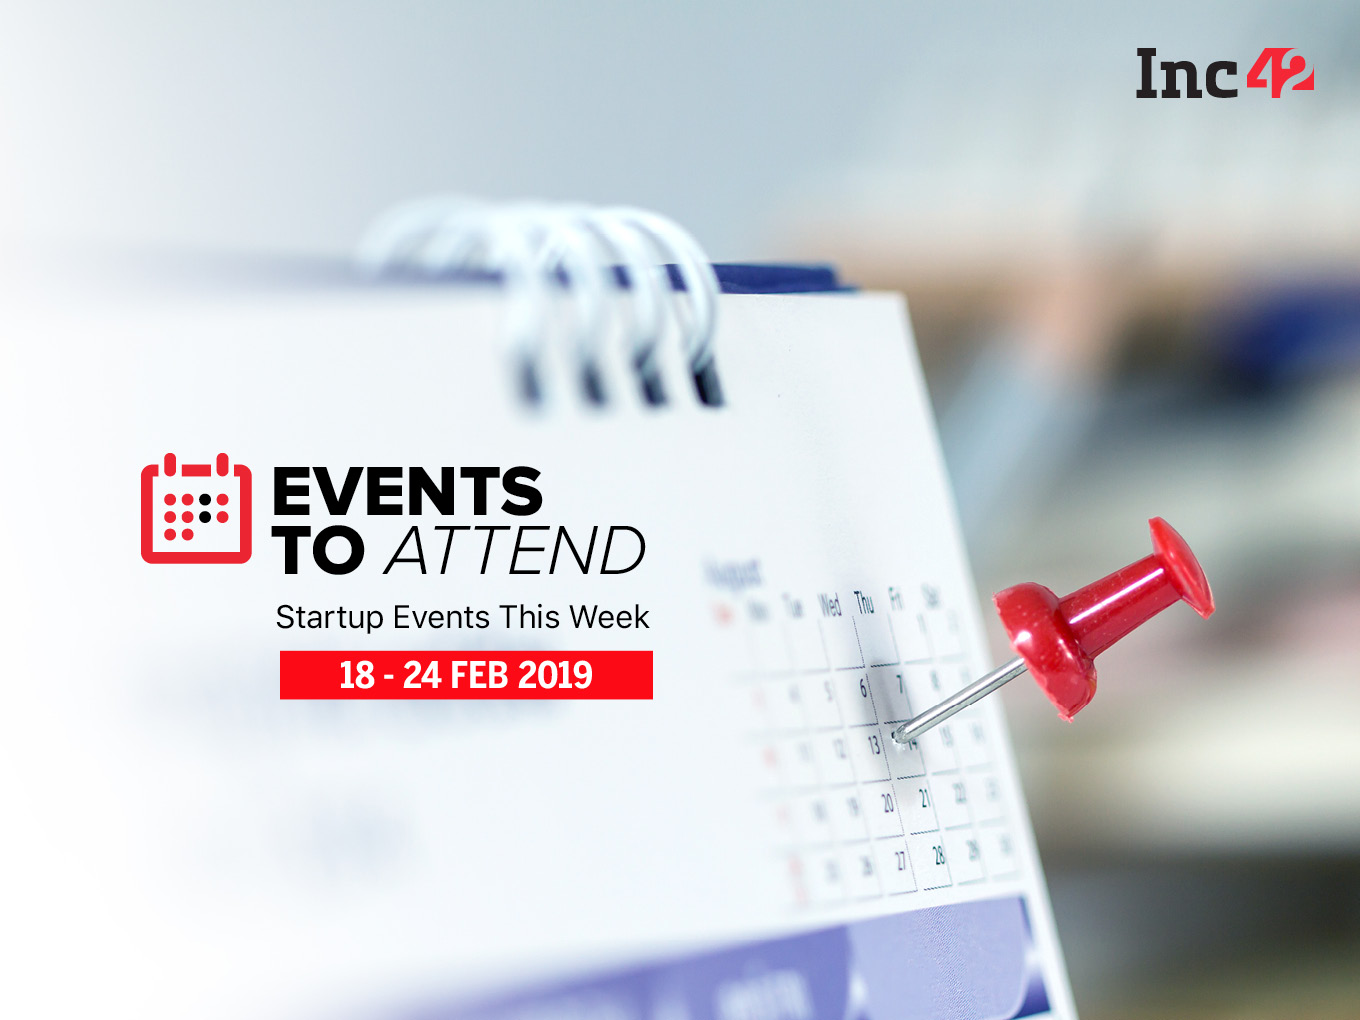 Startup Events This Week: Blockchain Summit India 2019 And More